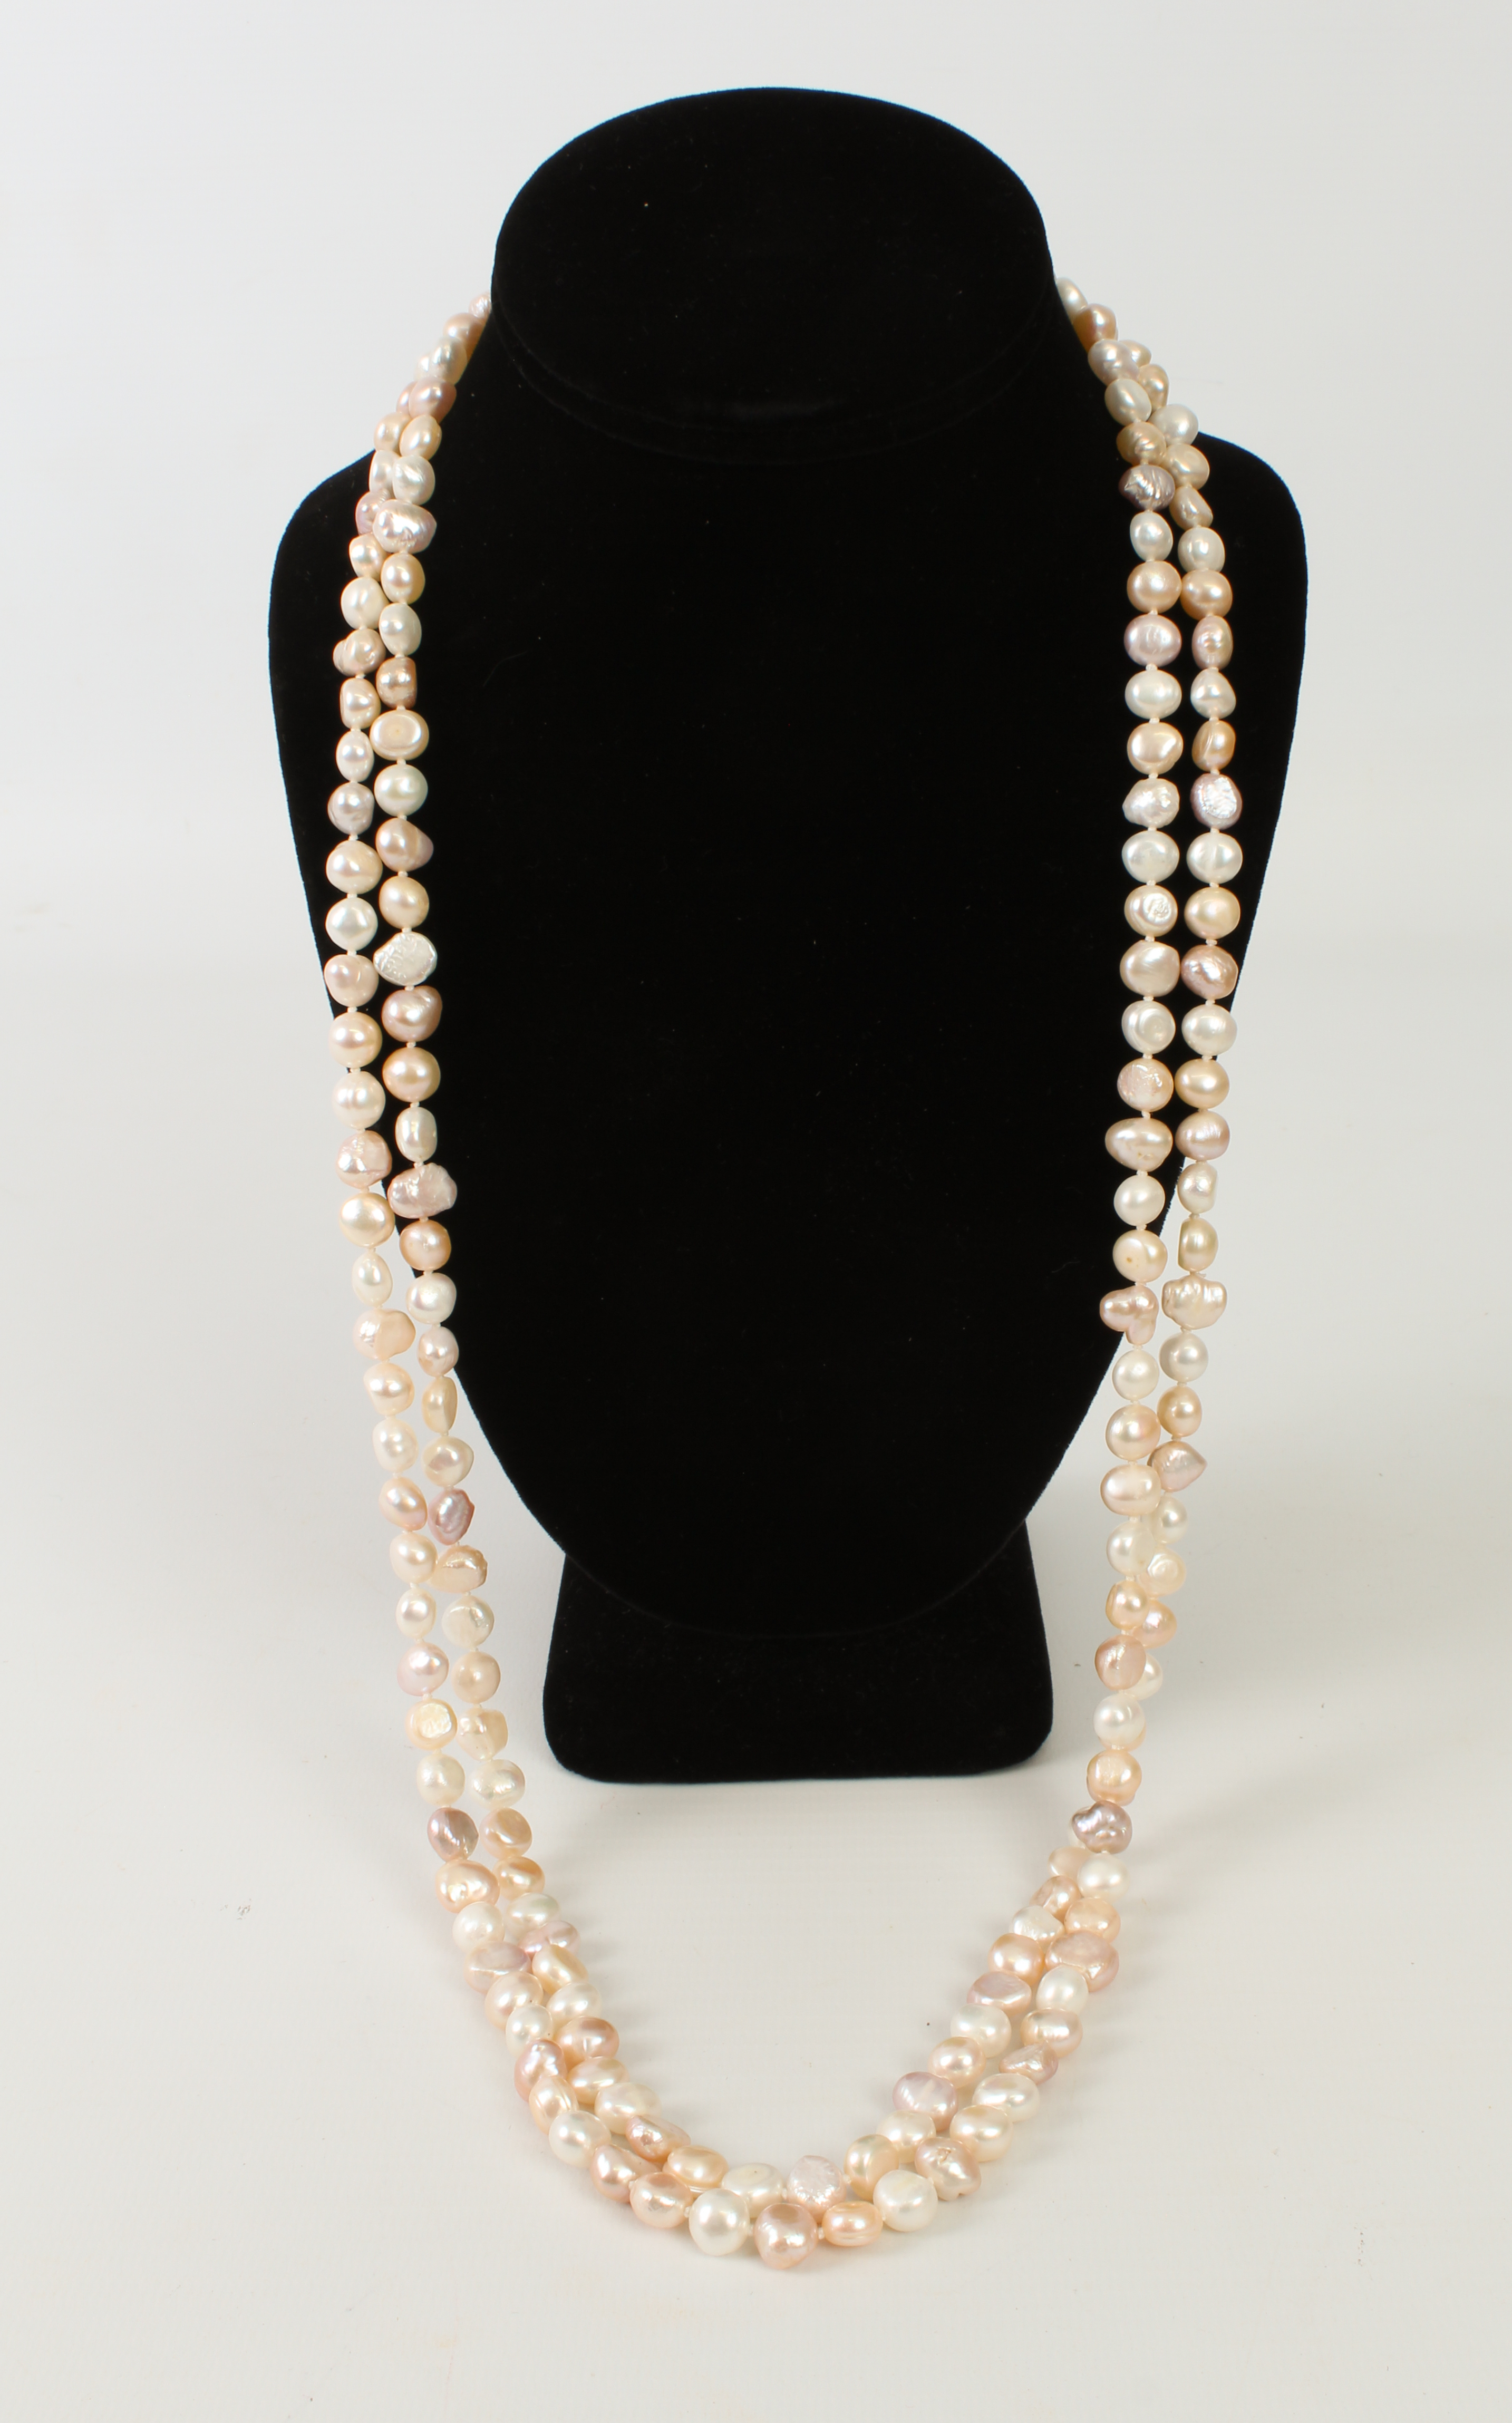 A long single-strand freshwater pearl necklace - with baroque-style pearls of varying pink and ivory